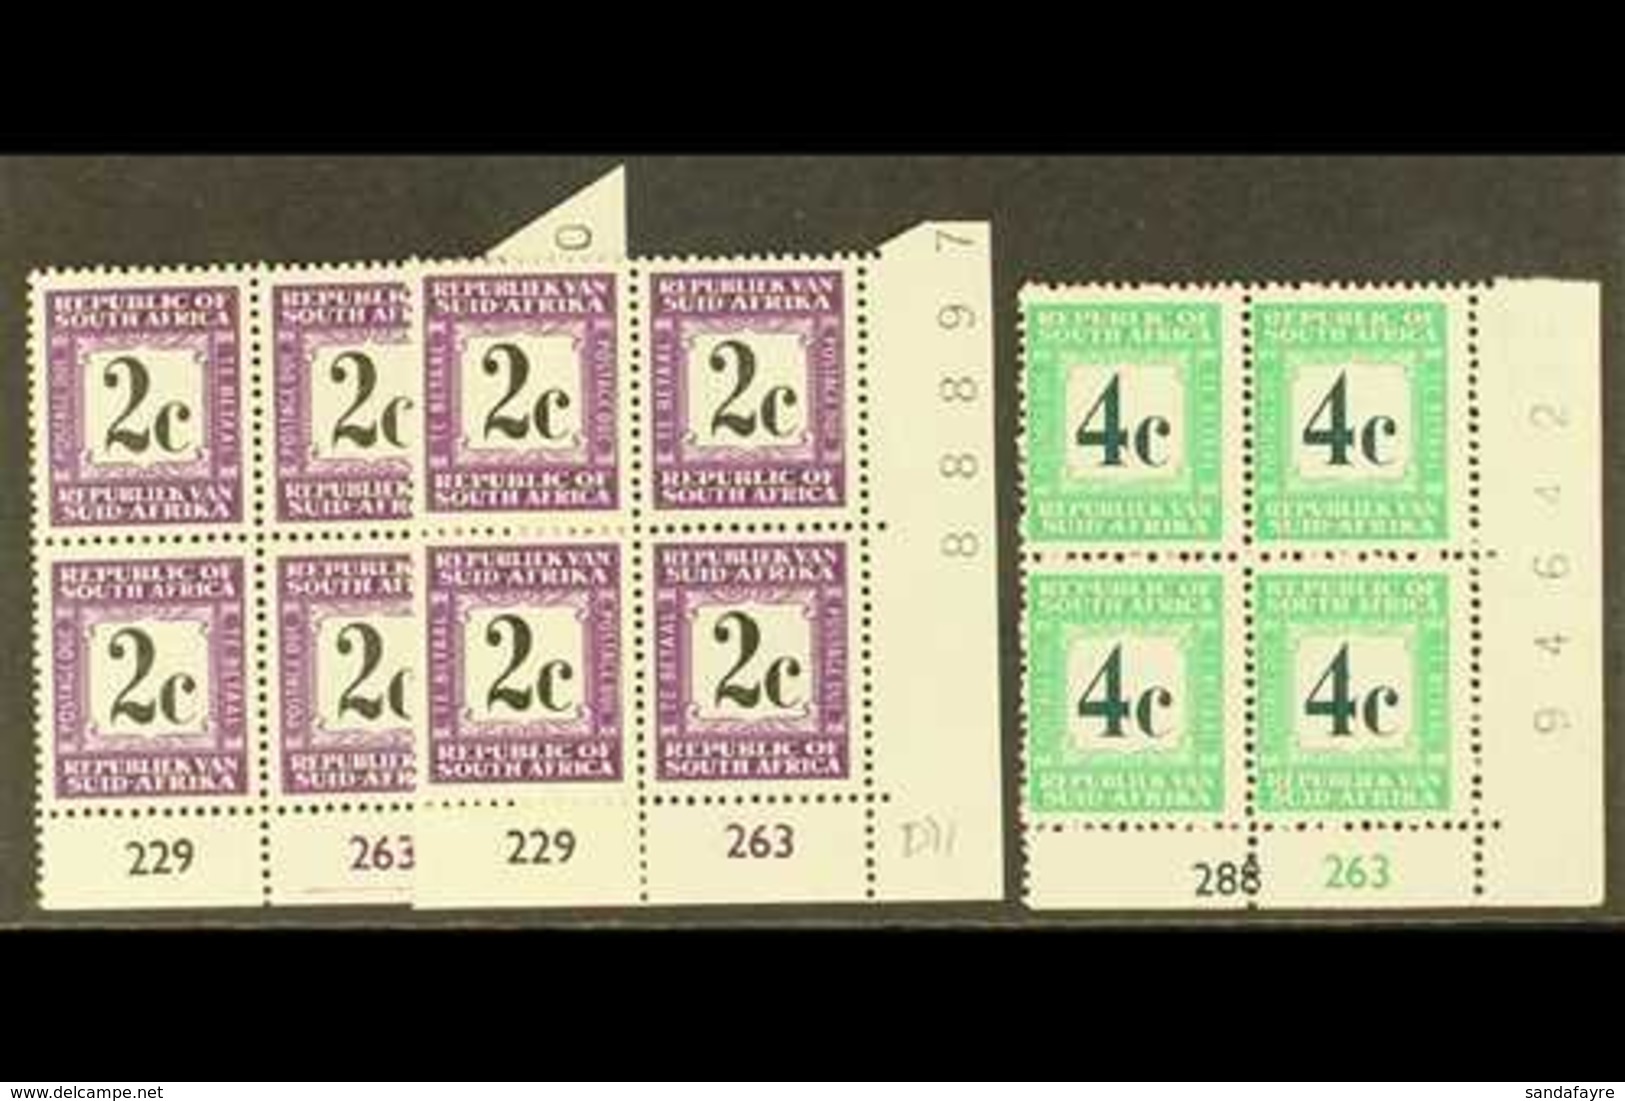 POSTAGE DUES  1971 2c Both Languages & 4c Perf.14 Issues, CYLINDER BLOCKS OF FOUR, SG D71/4, 4c Few Split Perfs, Otherwi - Ohne Zuordnung